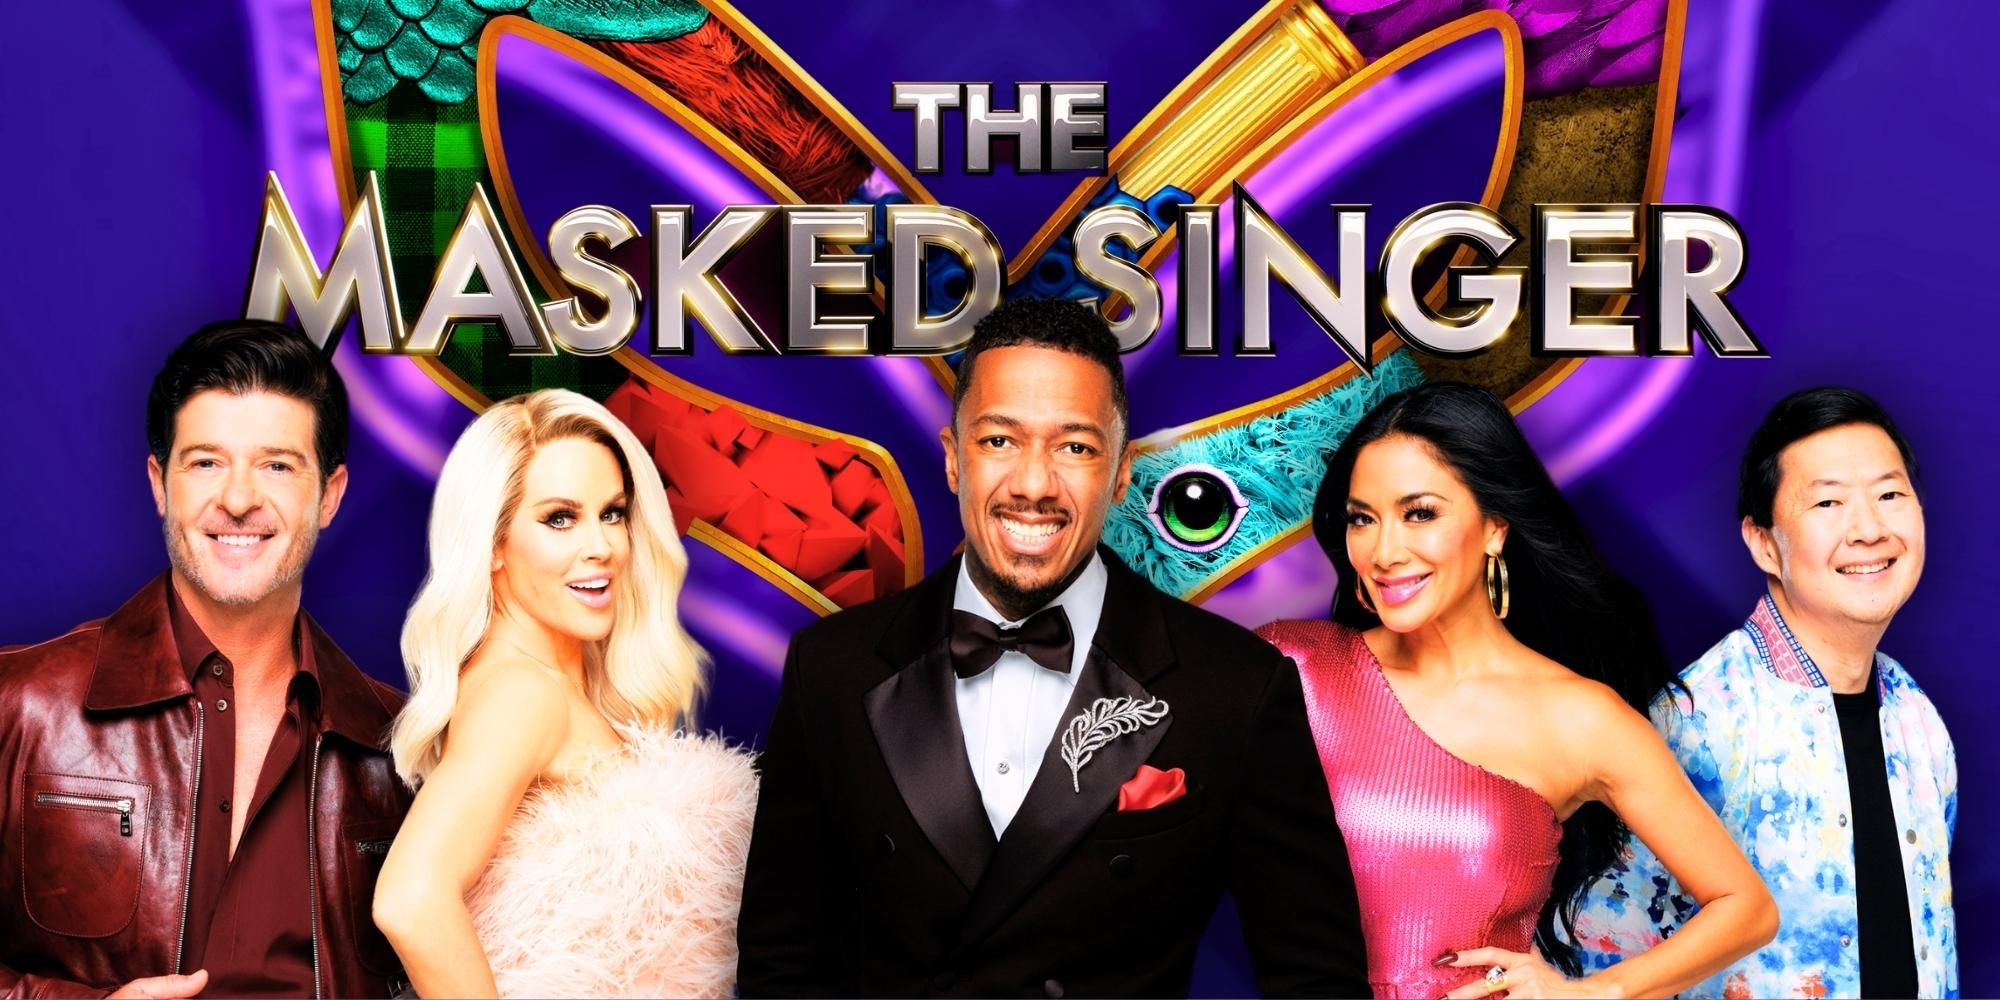 The Masked Singer logo above host Nick Cannon and panelists Robin Thicke, Jenny McCarthy, Nicole Scherzinger and Ken Jeong